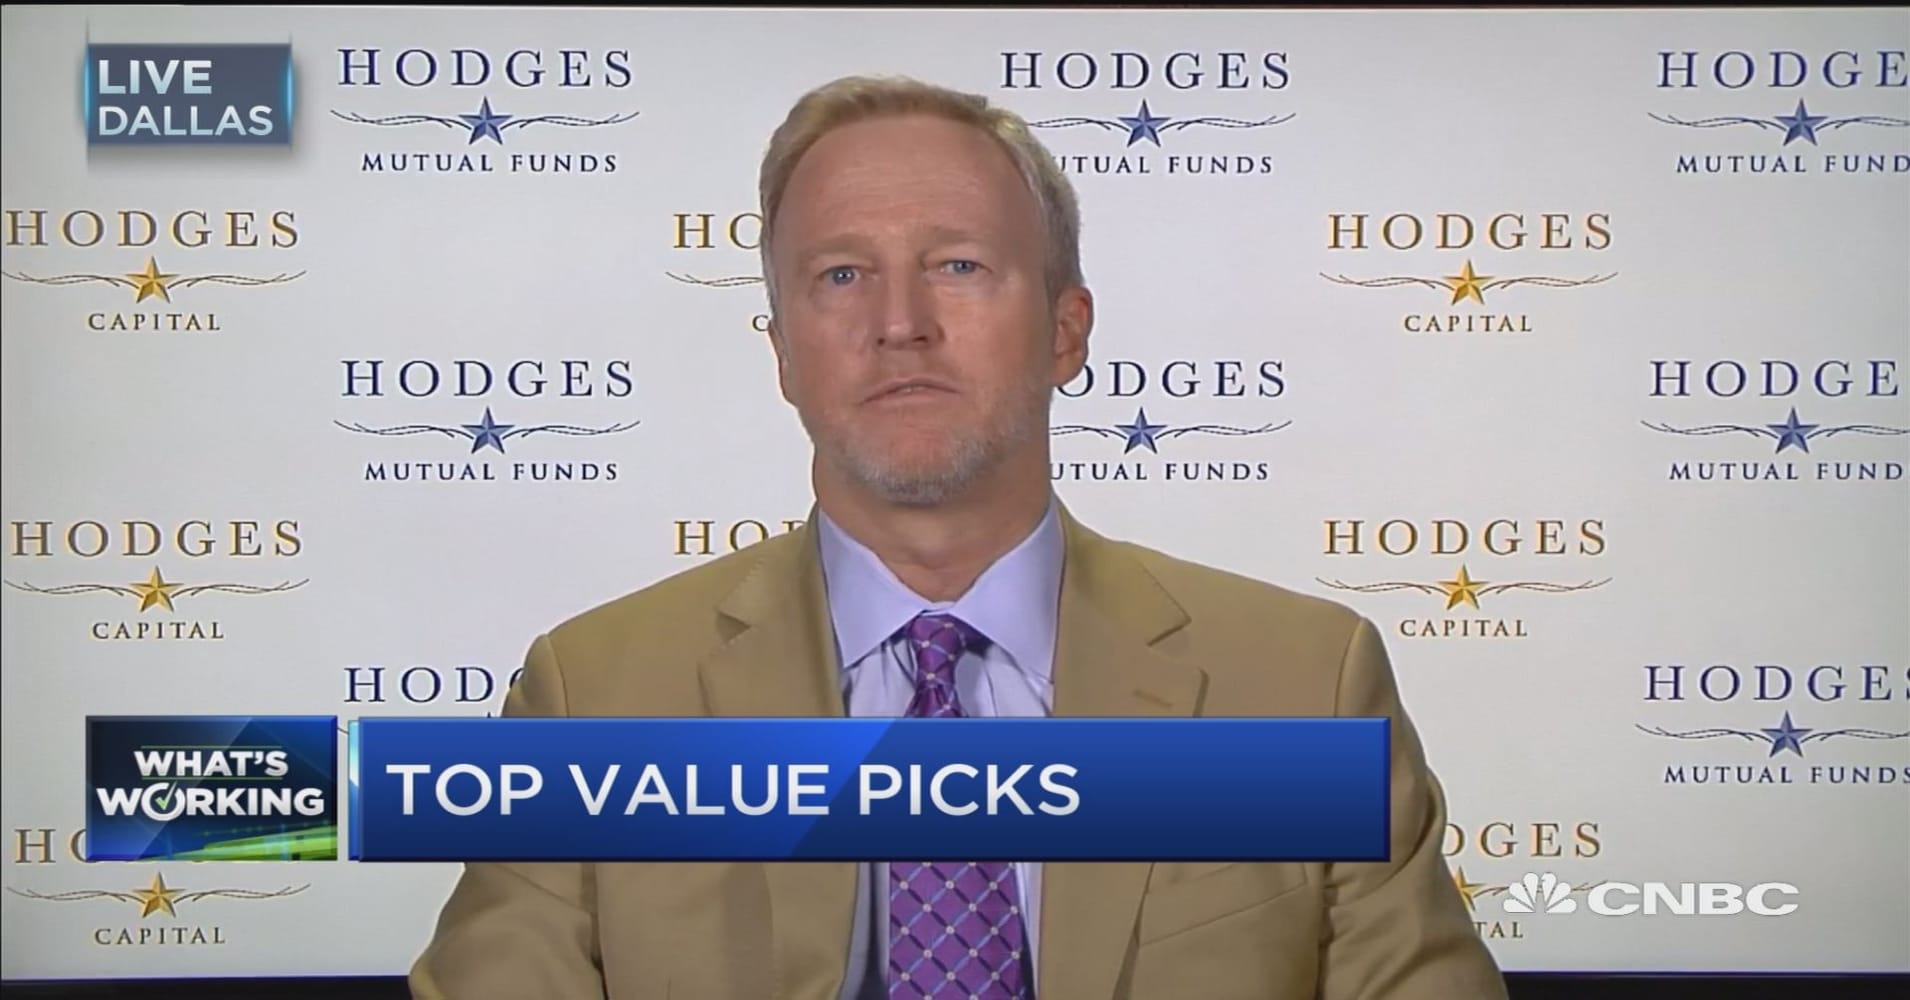 Craig Hodges: These stock plays are bargains. Here's why